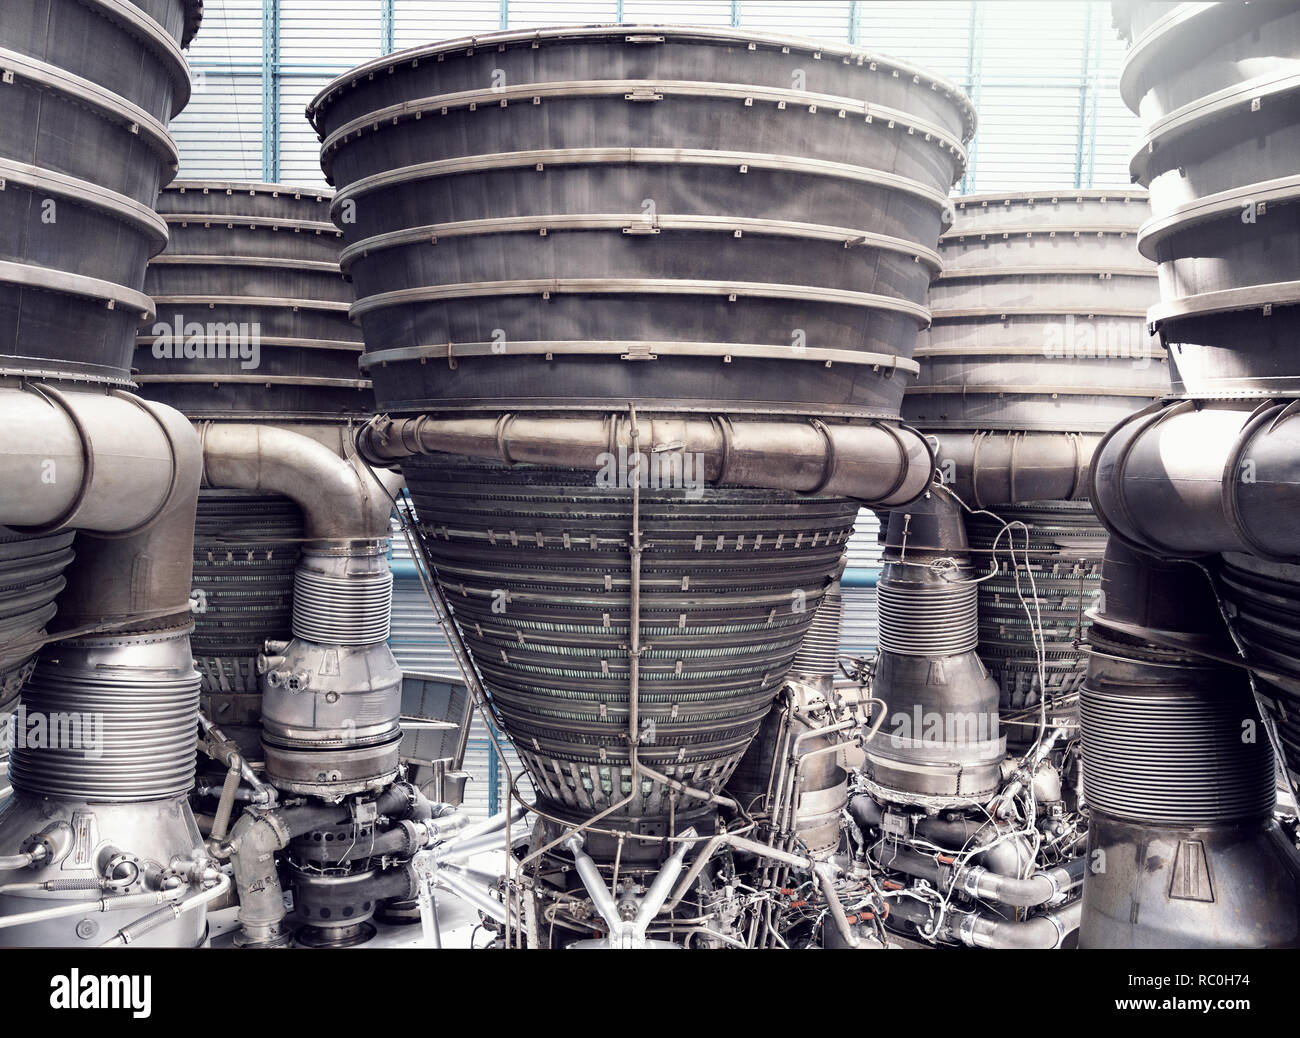 Saturn V F-1 rocket engines. The Apollo mission that launched a human to the moon. Stock Photo